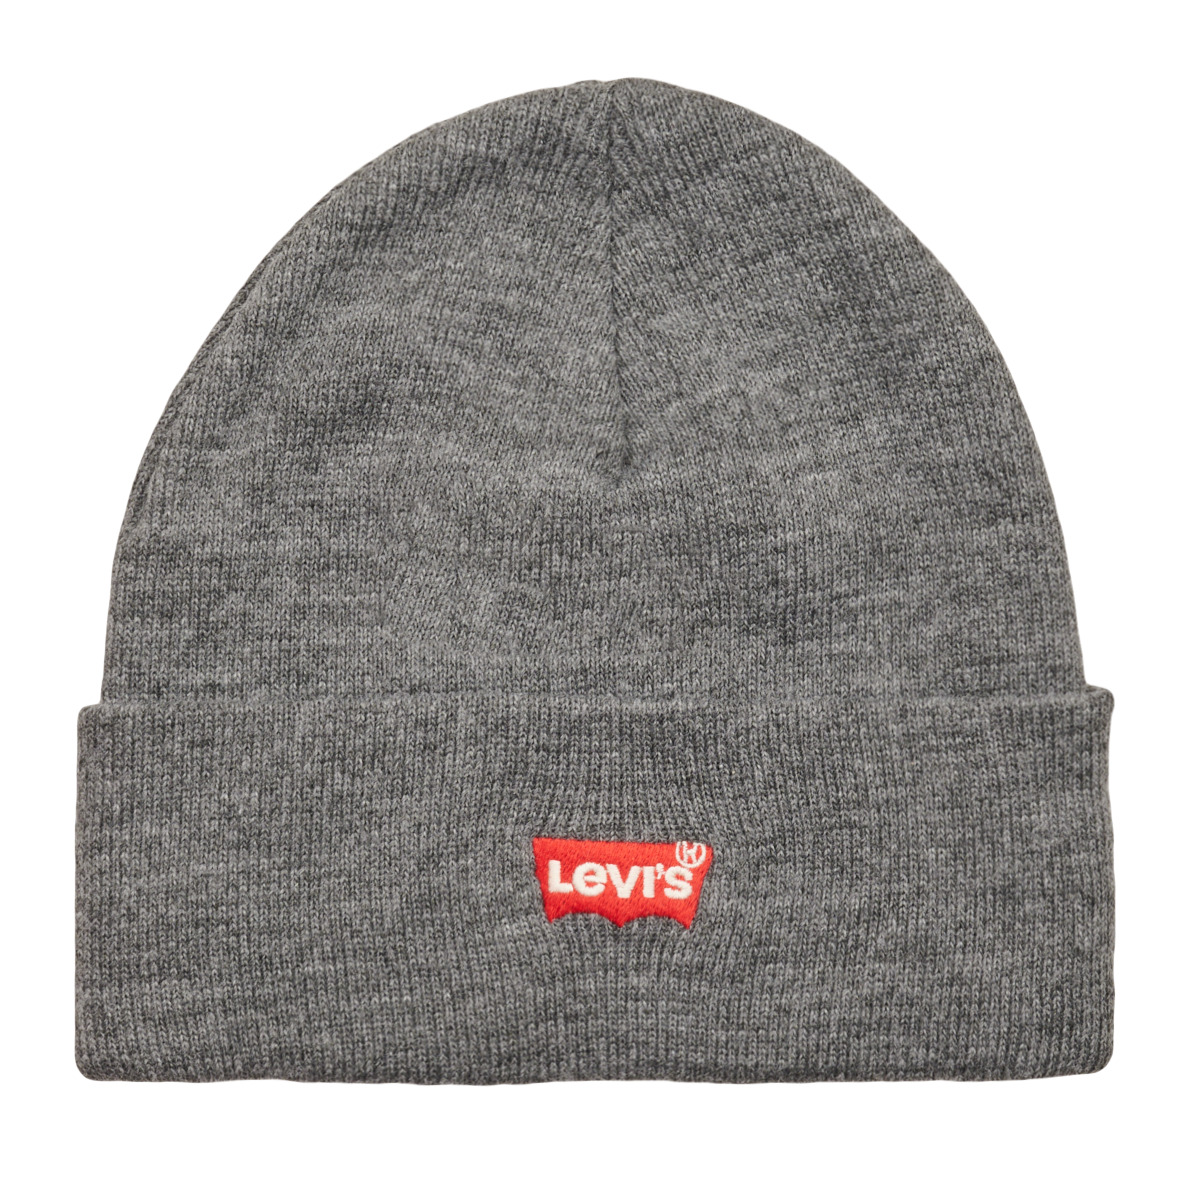 Acessórios Gorro Levi's RED BATWING EMBROIDERED SLOUCHY BEANIE Cinza